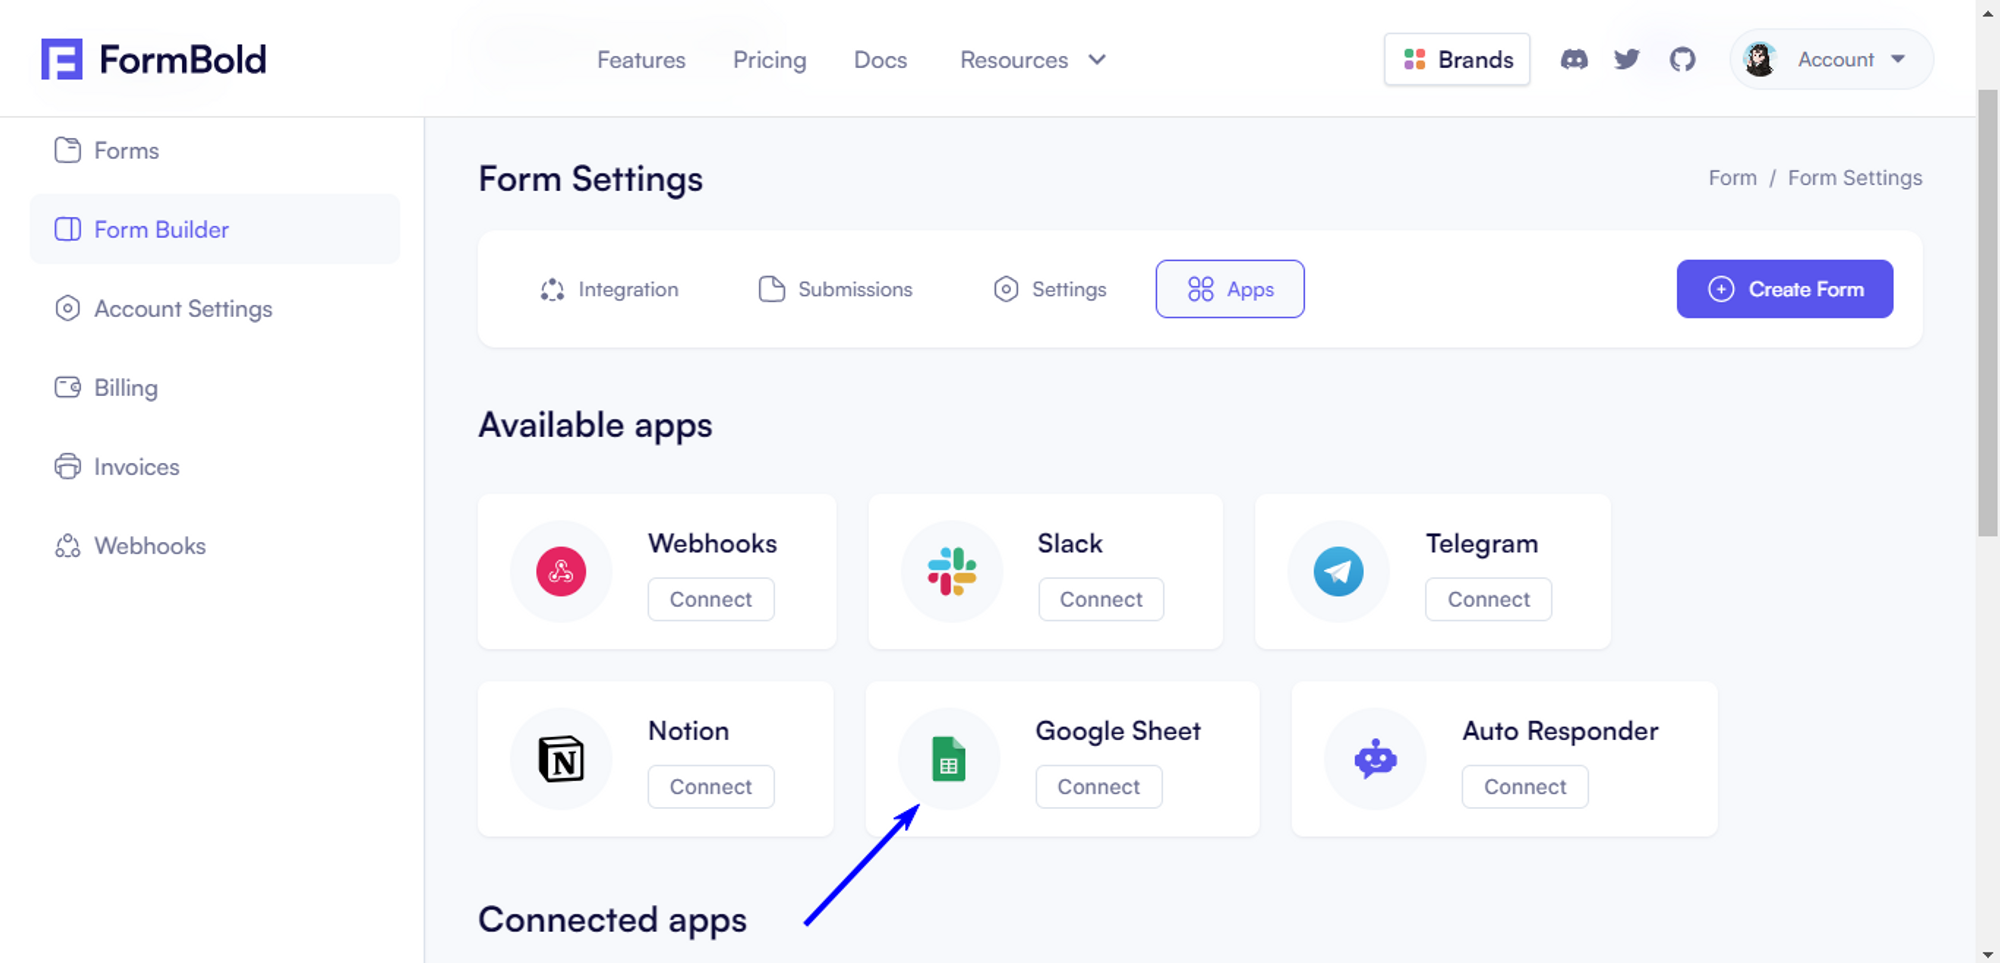 Connecting Apps